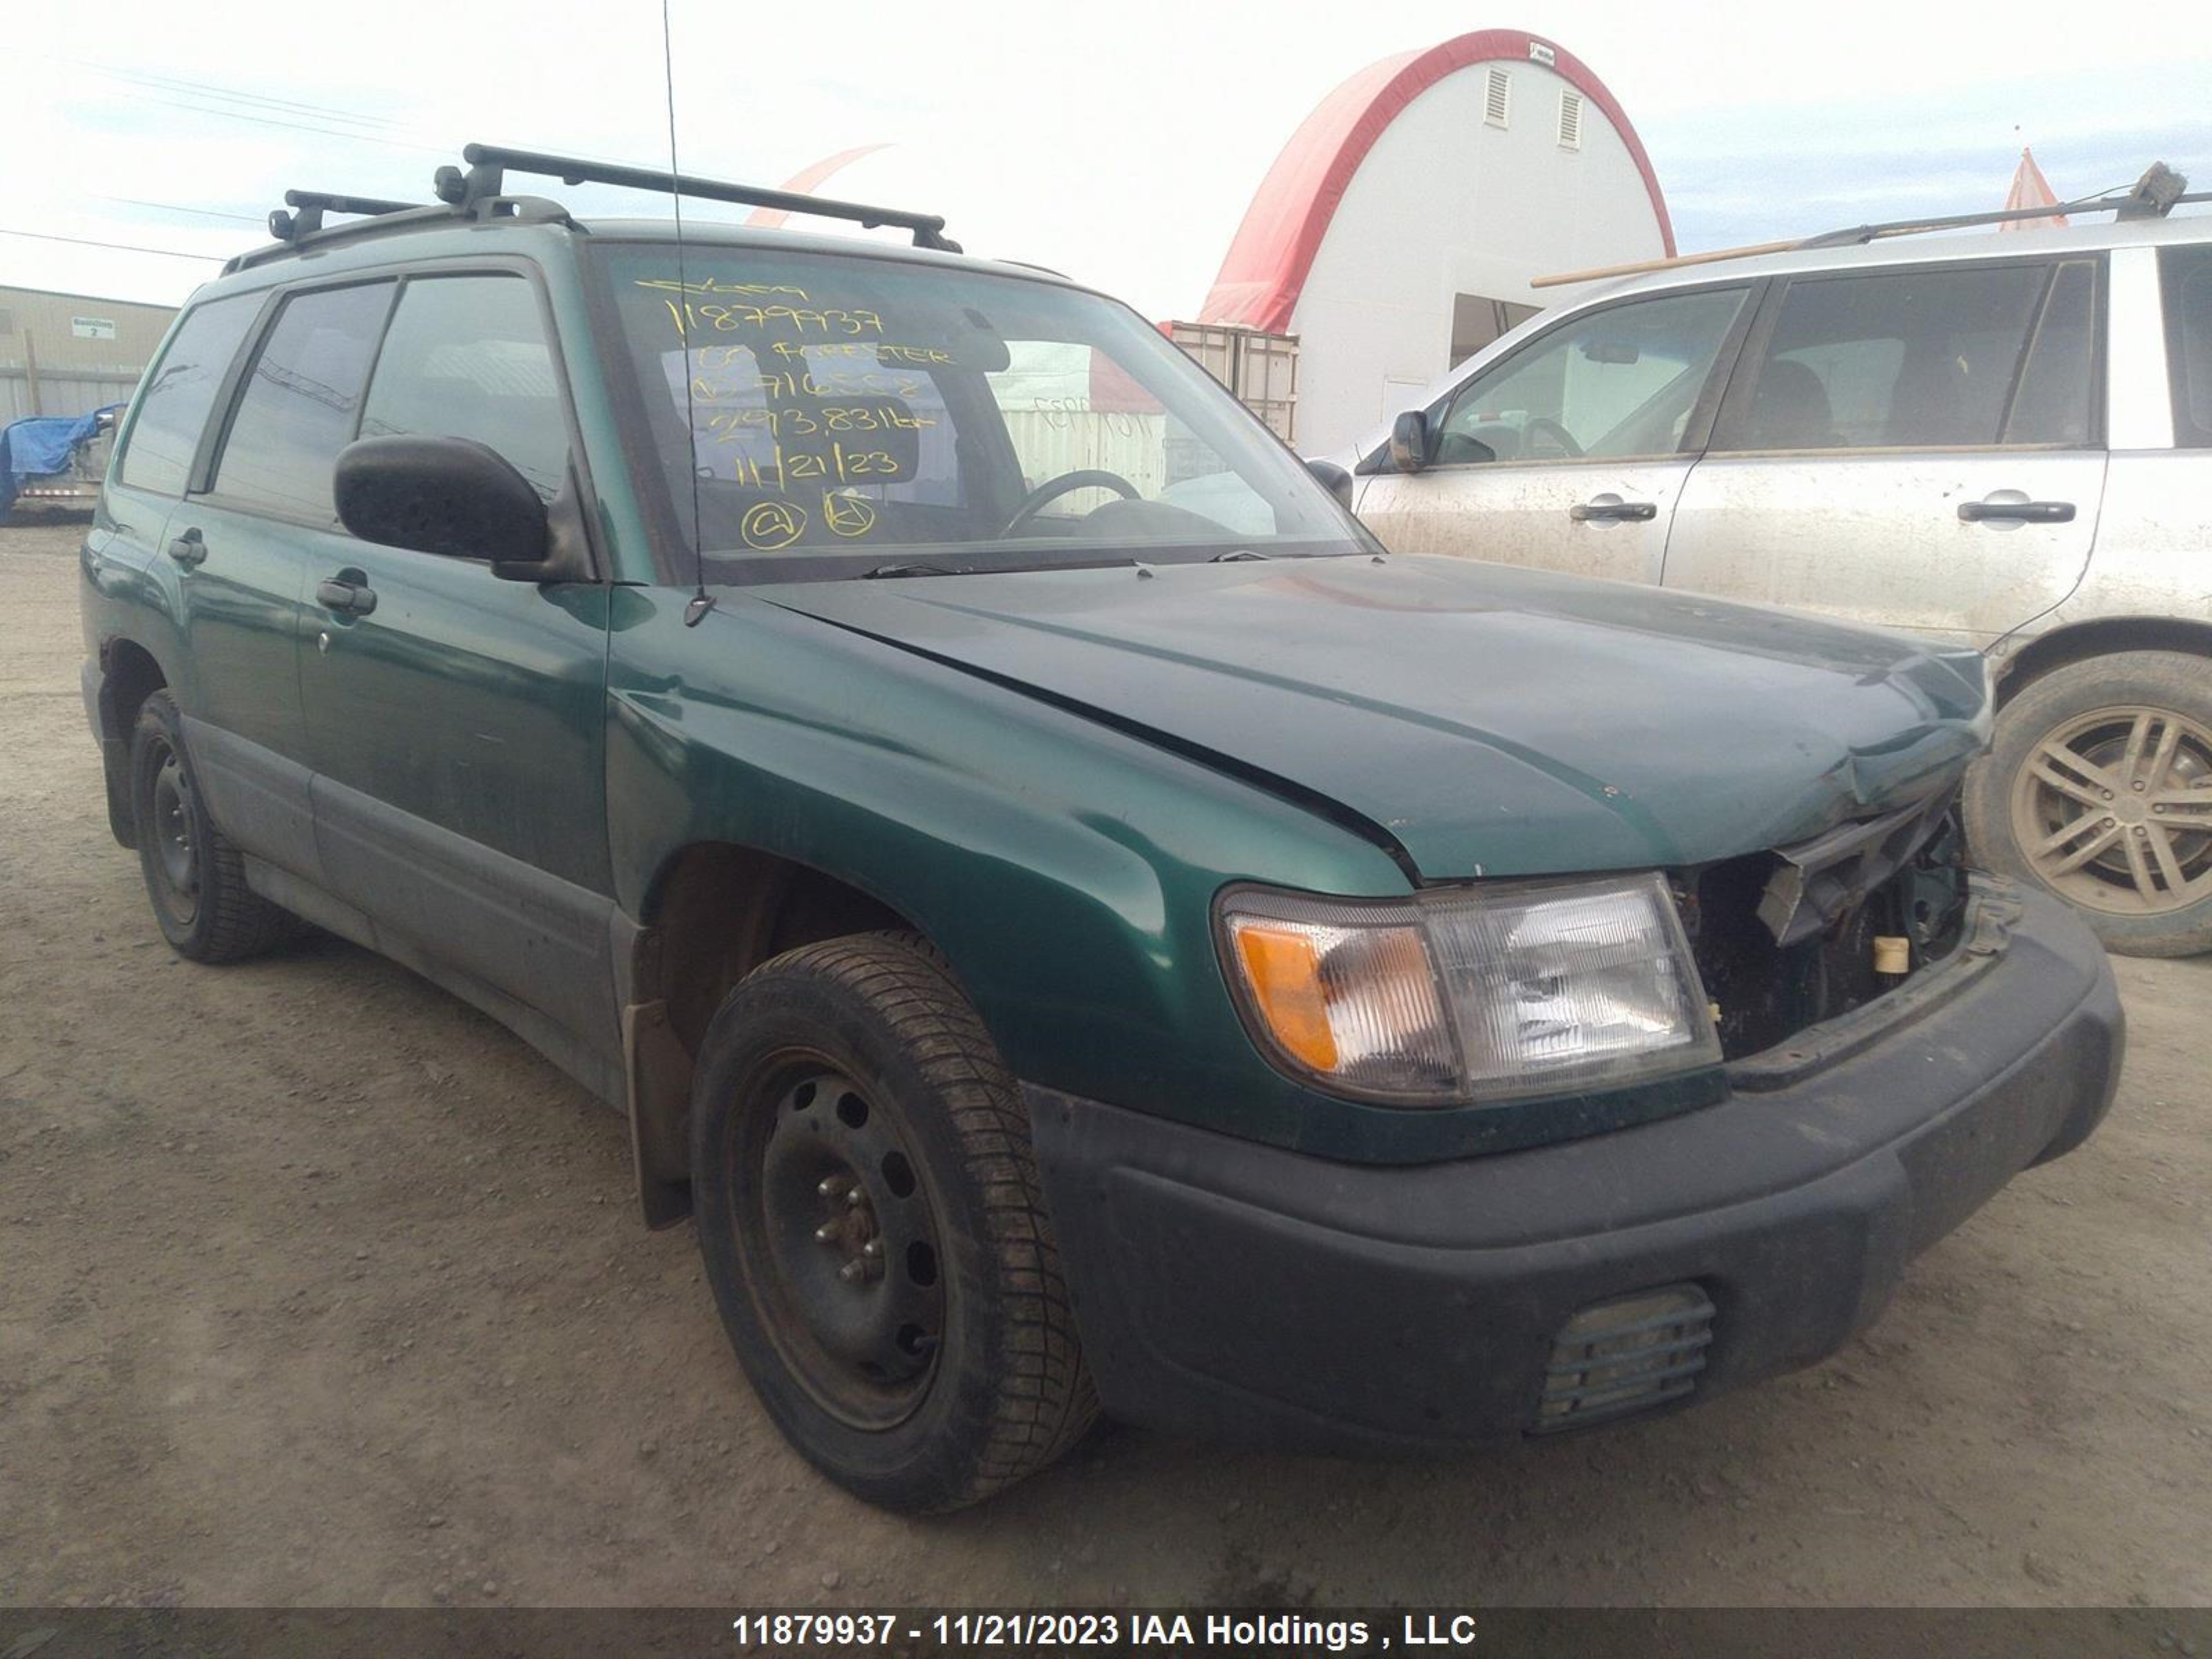 vin: JF1SF635XYG716558 JF1SF635XYG716558 2000 subaru forester 2500 for Sale in t1x0k1, 285125 Duff Drive , Rockyview, Alberta, USA